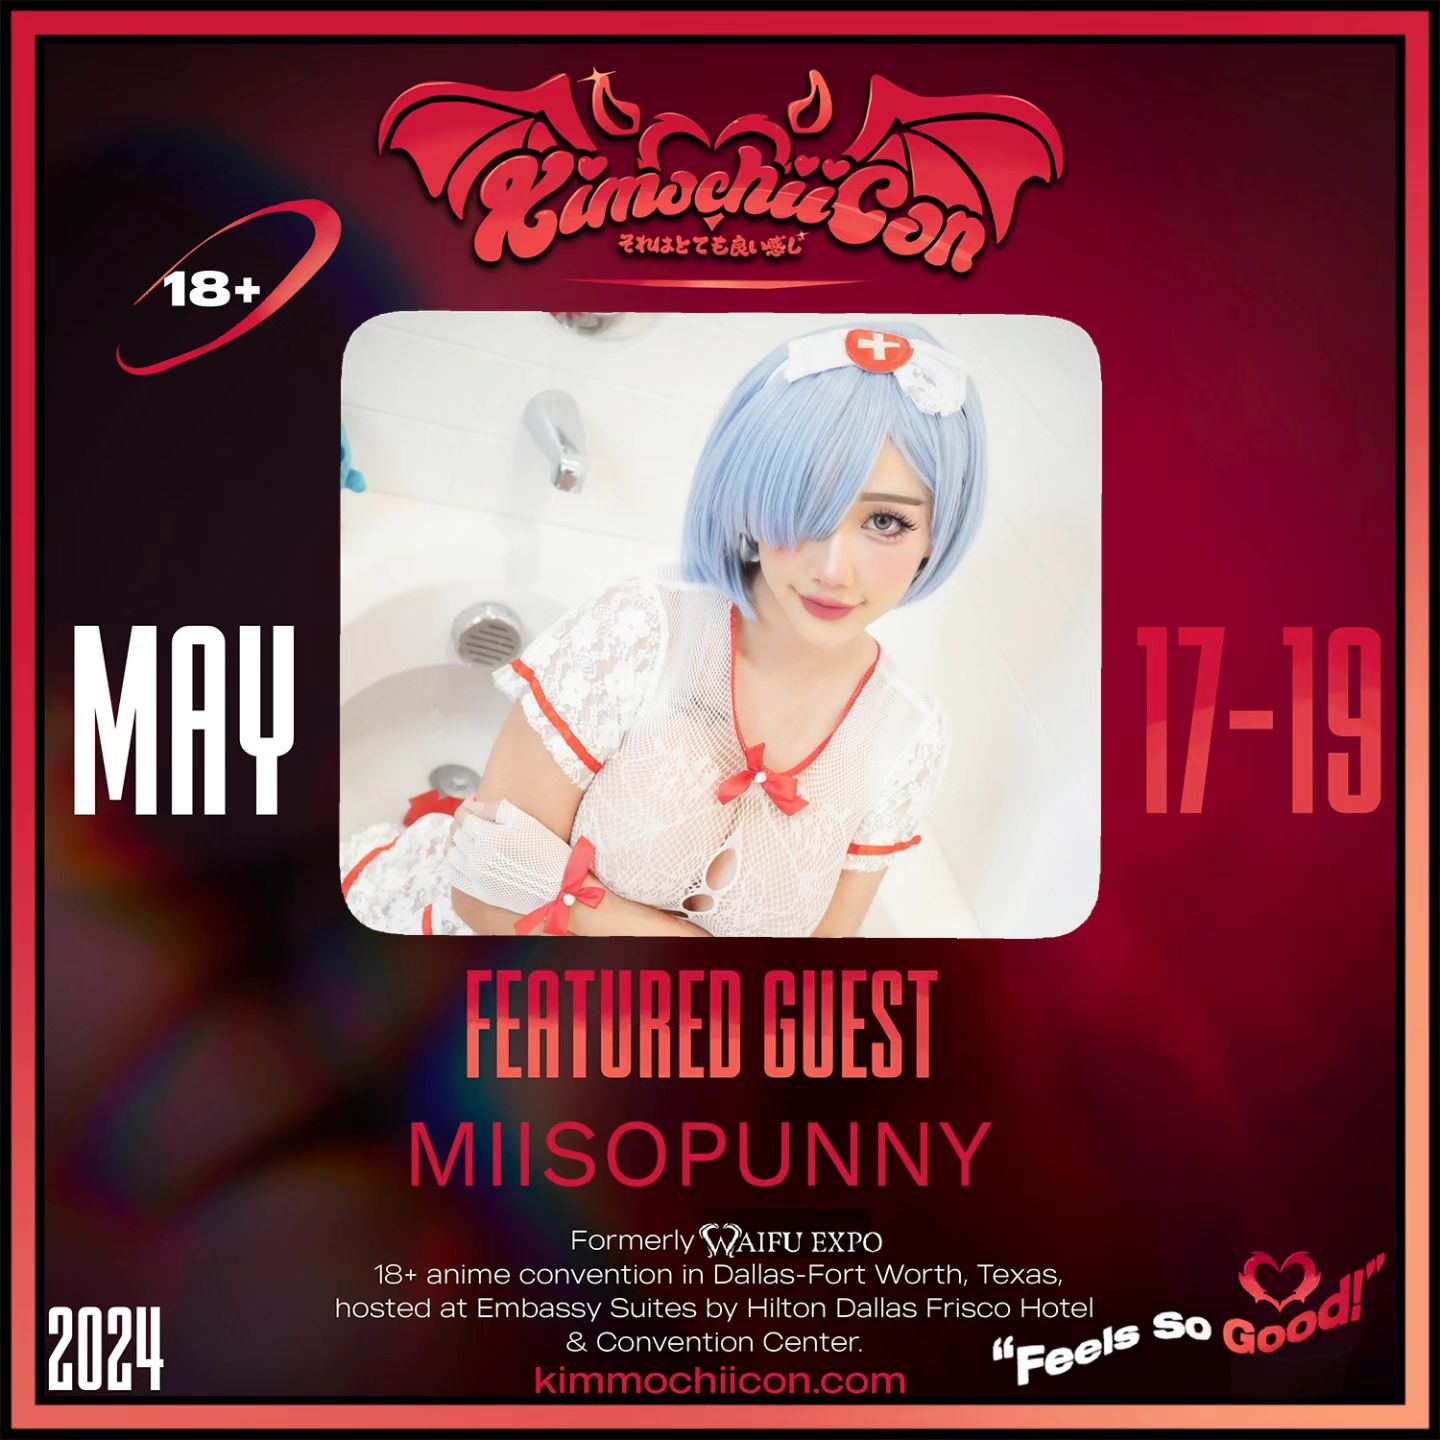 ❤️‍🔥GUEST ANNOUNCEMENT❤️‍🔥

Please help us welcome Featured Guest @miisopunny😍💖

#kimochiicon #animeconvention #animegirl #bishoujomom #cosplay #cosplayer #cosplaygirl #girlpower #manga #model #succubus #voiceactor #dallas #fypage